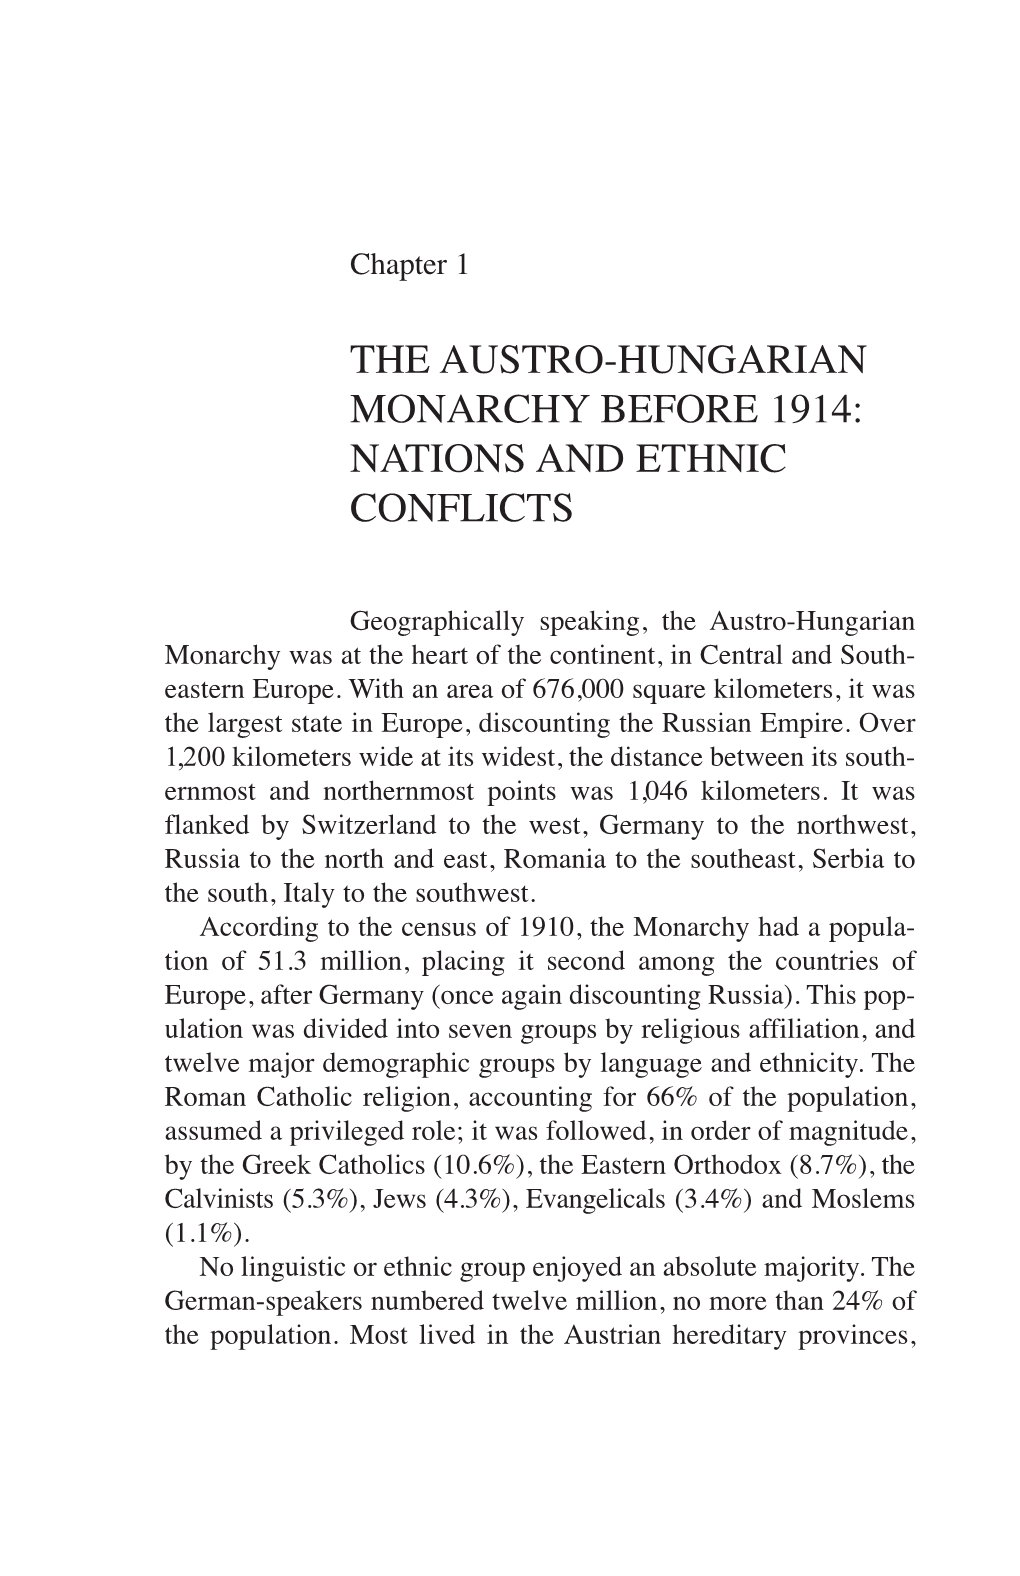 The Austro-Hungarian Monarchy Before 1914: Nations and Ethnic Conflicts